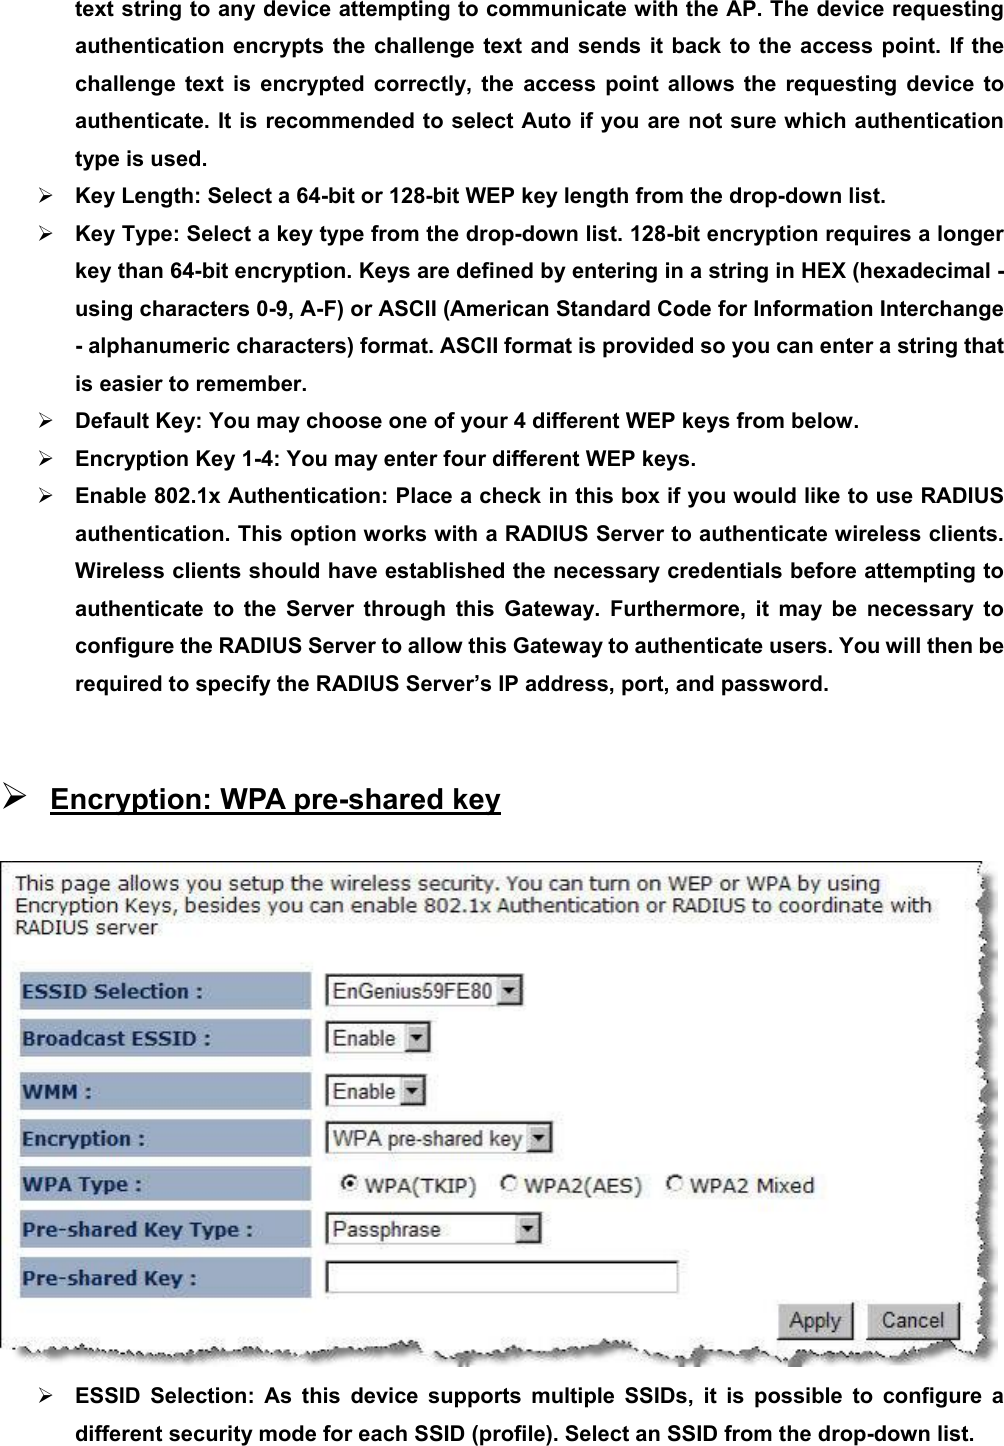 text string to any device attempting to communicate with the AP. The device requesting authentication encrypts the challenge text and sends it back to the access point. If the challenge text is encrypted correctly, the access point allows the requesting device to authenticate. It is recommended to select Auto if you are not sure which authentication type is used. ¾ Key Length: Select a 64-bit or 128-bit WEP key length from the drop-down list.   ¾ Key Type: Select a key type from the drop-down list. 128-bit encryption requires a longer key than 64-bit encryption. Keys are defined by entering in a string in HEX (hexadecimal - using characters 0-9, A-F) or ASCII (American Standard Code for Information Interchange - alphanumeric characters) format. ASCII format is provided so you can enter a string that is easier to remember. ¾ Default Key: You may choose one of your 4 different WEP keys from below.   ¾ Encryption Key 1-4: You may enter four different WEP keys.   ¾ Enable 802.1x Authentication: Place a check in this box if you would like to use RADIUS authentication. This option works with a RADIUS Server to authenticate wireless clients. Wireless clients should have established the necessary credentials before attempting to authenticate to the Server through this Gateway. Furthermore, it may be necessary to configure the RADIUS Server to allow this Gateway to authenticate users. You will then be required to specify the RADIUS Server’s IP address, port, and password.    ¾ Encryption: WPA pre-shared key  ¾ ESSID Selection: As this device supports multiple SSIDs, it is possible to configure a different security mode for each SSID (profile). Select an SSID from the drop-down list.   